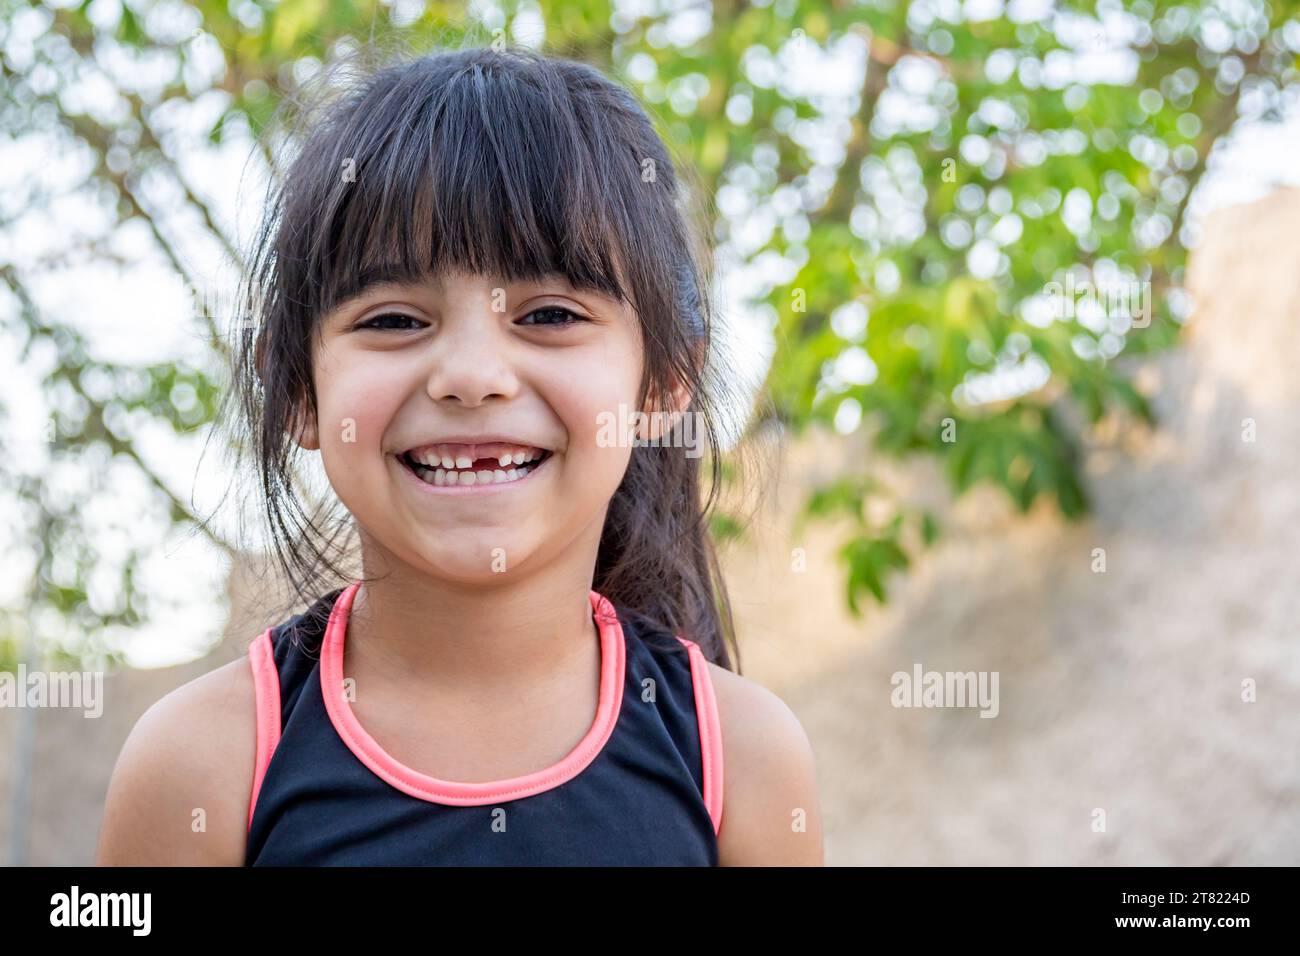 Close-up portrait of her. She is friendly, charming, sweet, curious and cheerful. Little girl outdoors in sports clothing. Stock Photo